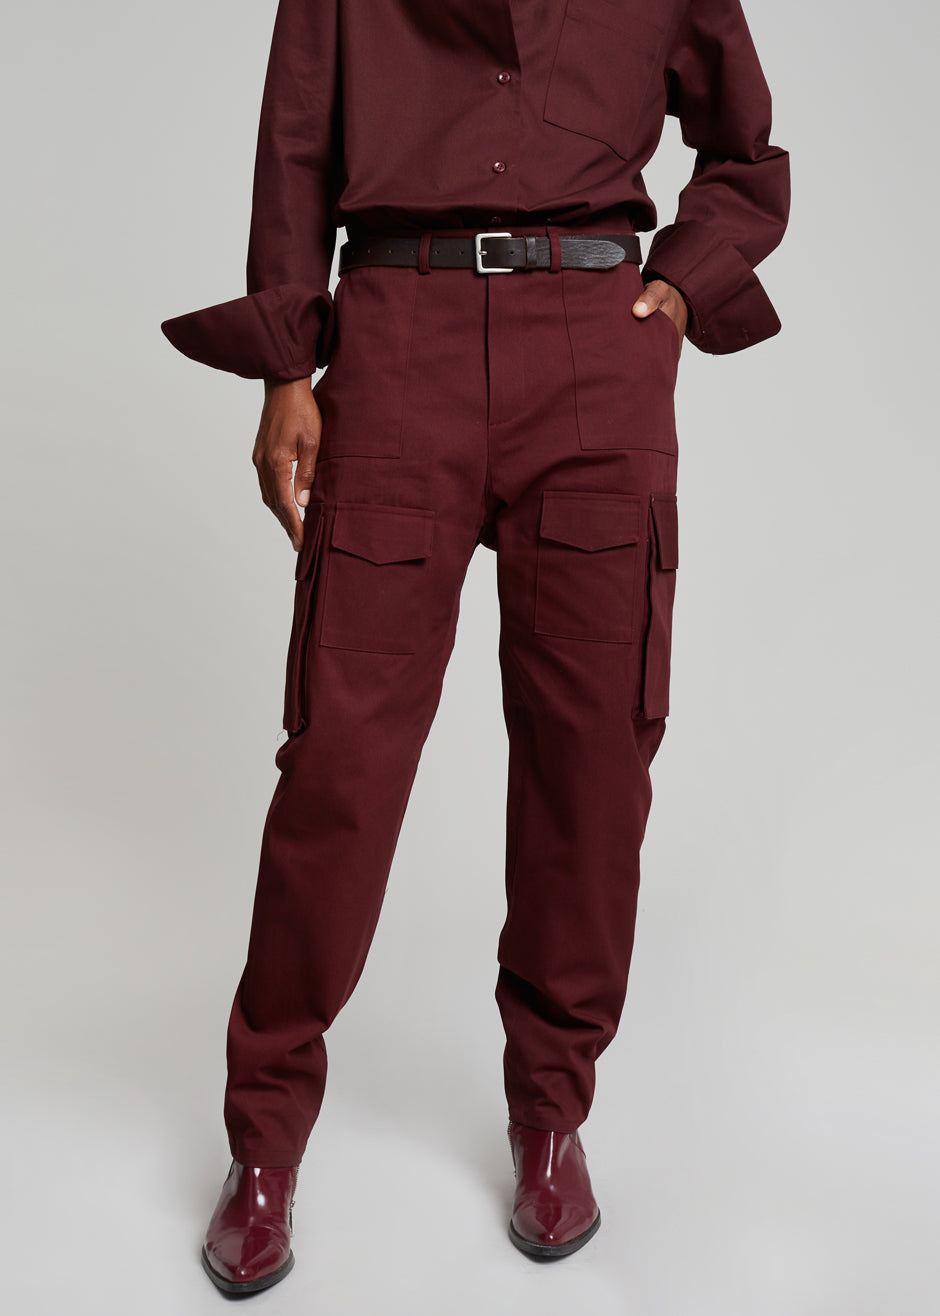 Making Moves Faux Leather Cargo Pant - Burgundy